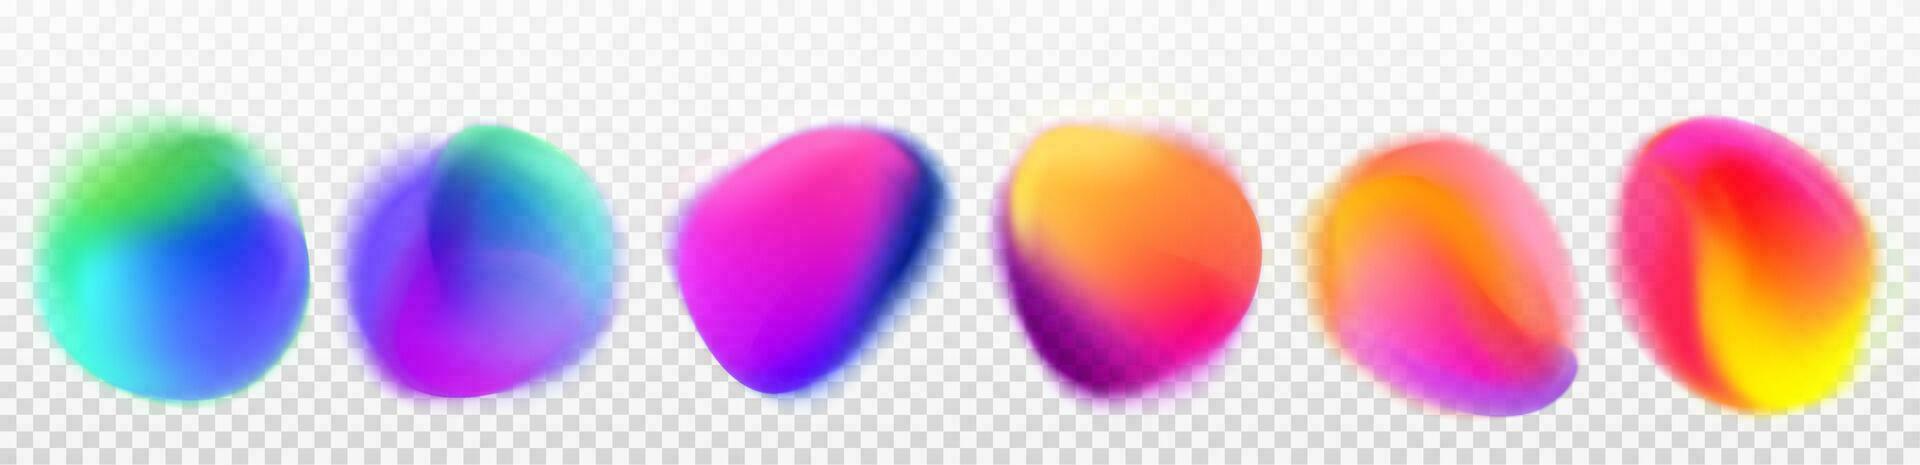 Realistic set of abstract gradient spots vector